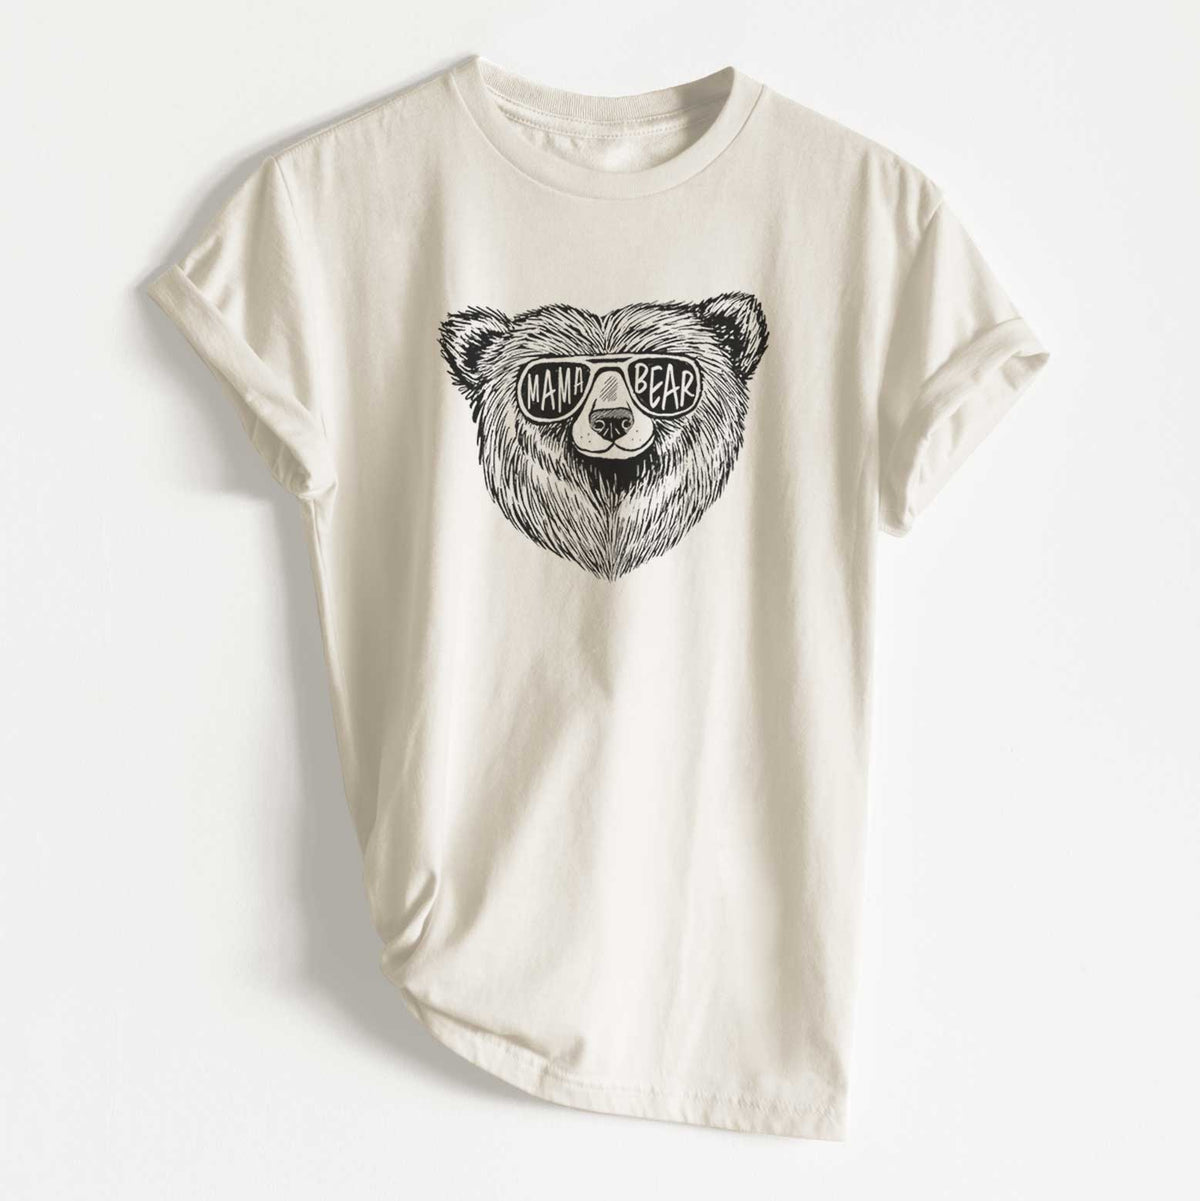 Mama Bear - Unisex Recycled Eco Tee  - CLOSEOUT - FINAL SALE